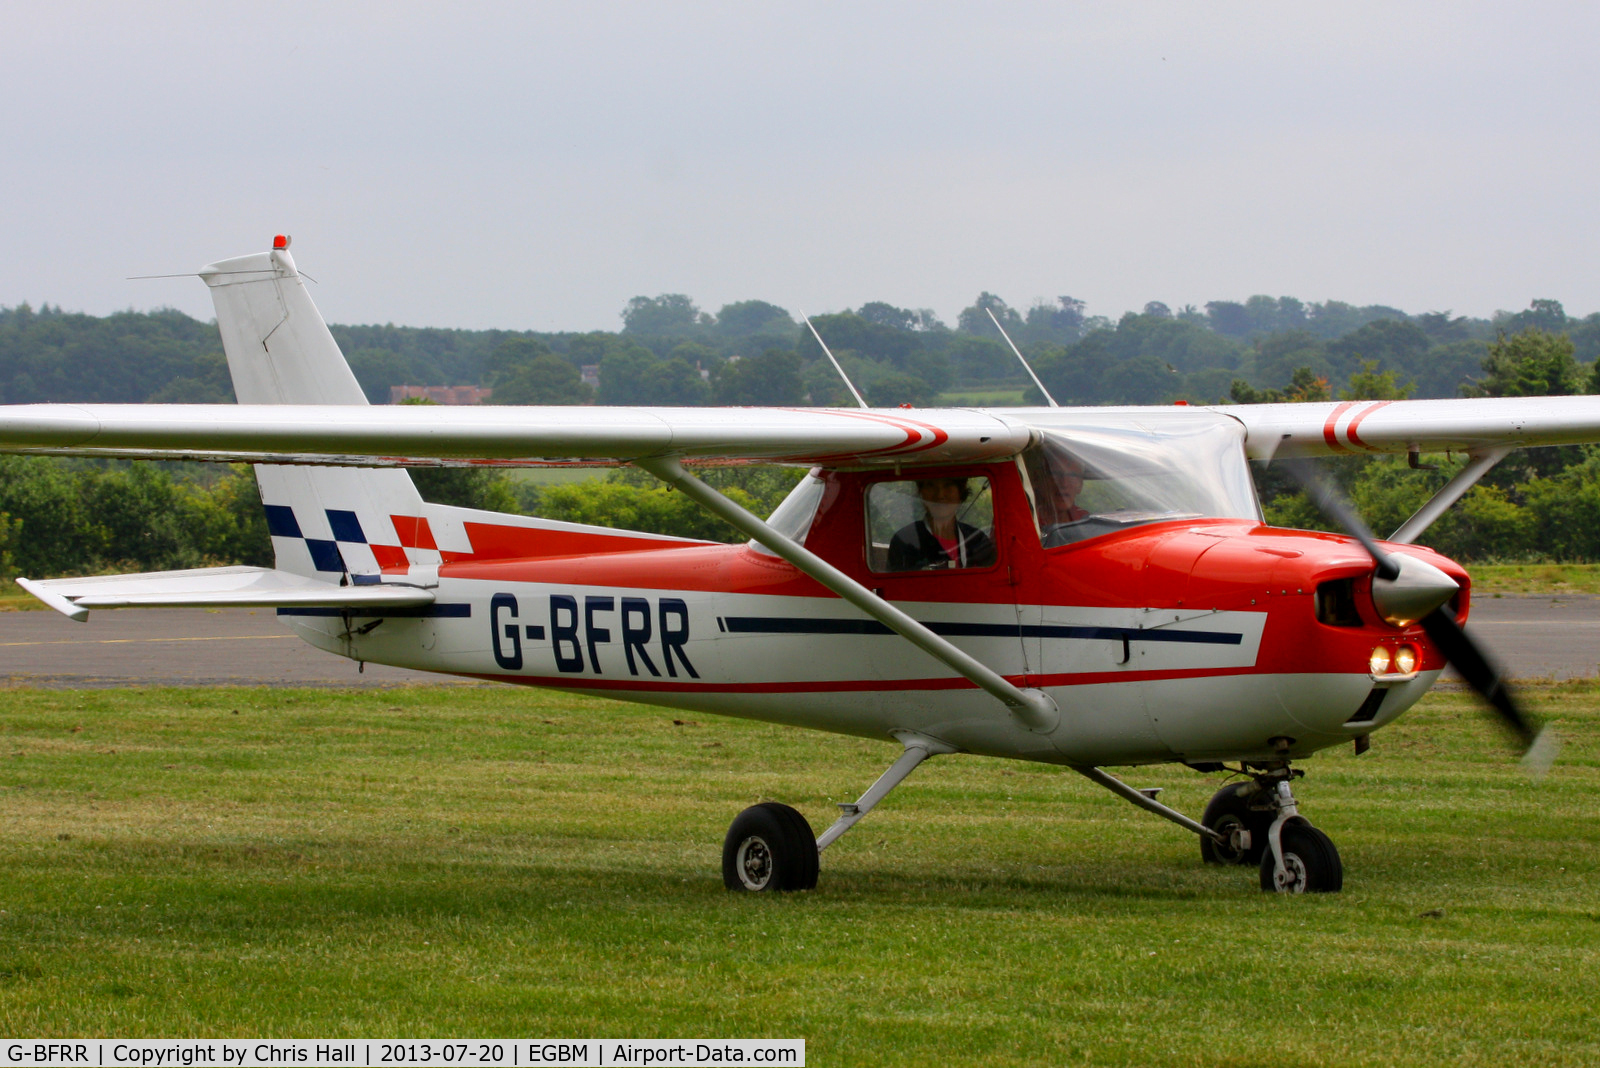 G-BFRR, 1977 Reims FRA150M Aerobat C/N 0326, at the Tatenhill Charity Fly in